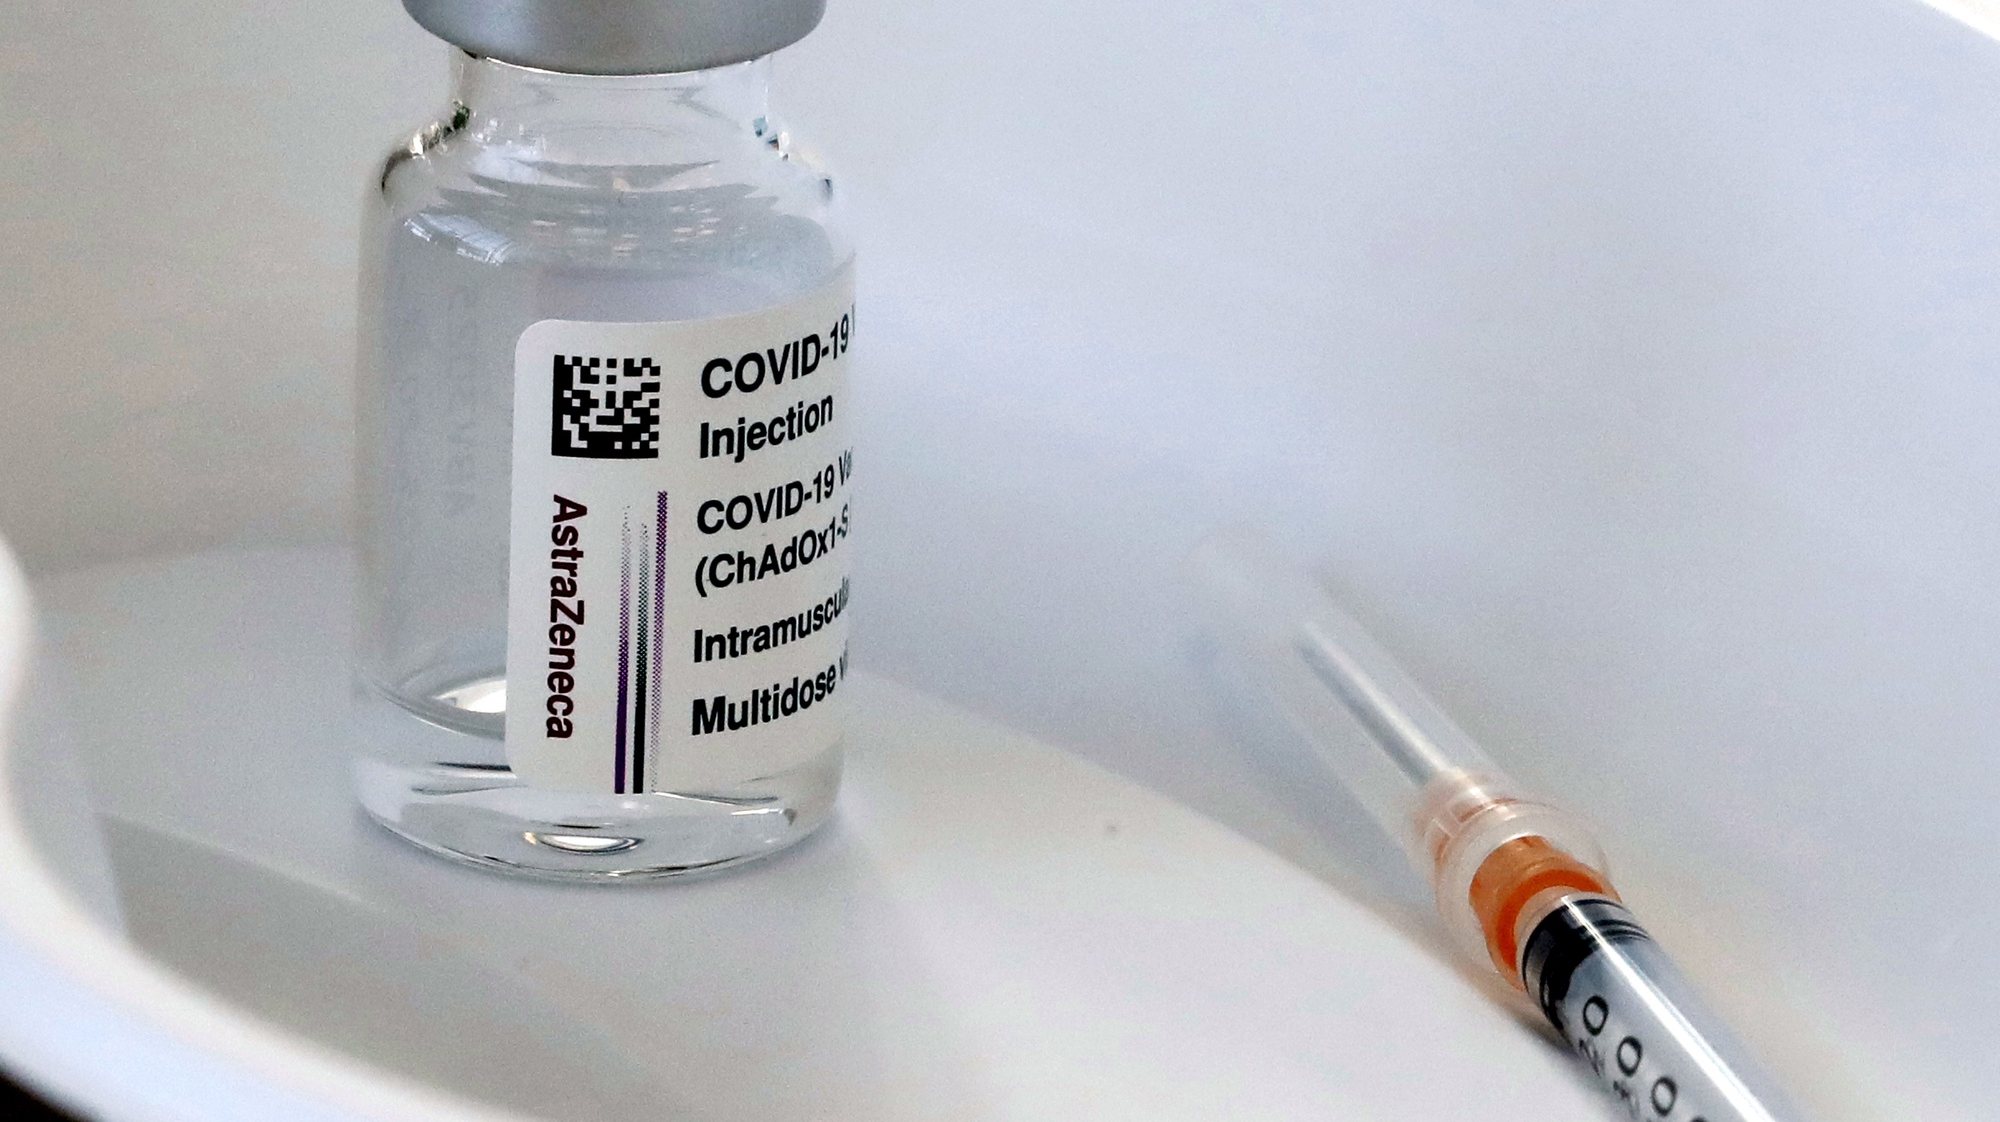 epa09106549 (FILE) A vial of the Oxford-AstraZeneca COVID-19 vaccine during a vaccination campaign in Riga, Latvia, 11 February 2021 (reissued 30 March 2021). The German city-state of Berlin is suspending the use of the AstraZeneca coronavirus vaccine for people under the age of 60 after reports of blood clot cases, Health Senator Dilek Kalayci said 30 March 2021.  EPA/TOMS KALNINS *** Local Caption *** 56689309